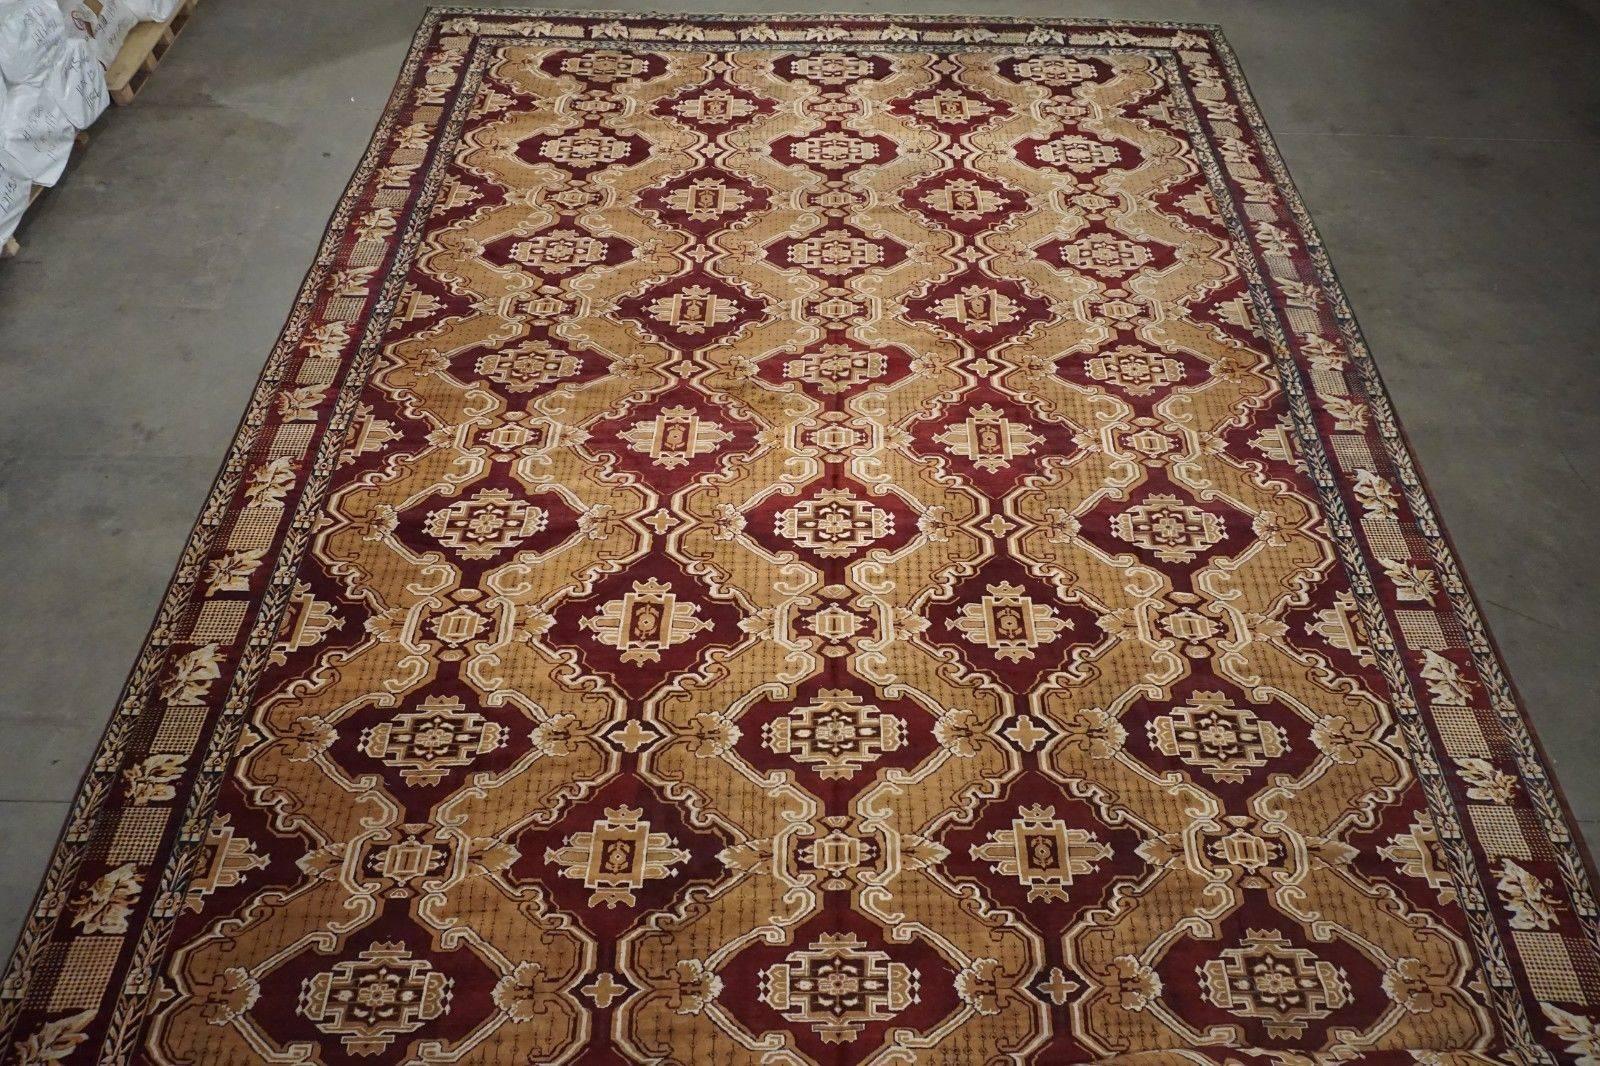 Antique Indian Agra rug,

circa 1880,

16' 7" x 33' 7"

Hand-Knotted wool pile, cotton foundation 

Field color: Gold
Border color: Burgundy
Accent colors: Copper, ivory, midnight-blue, orange-rust.

